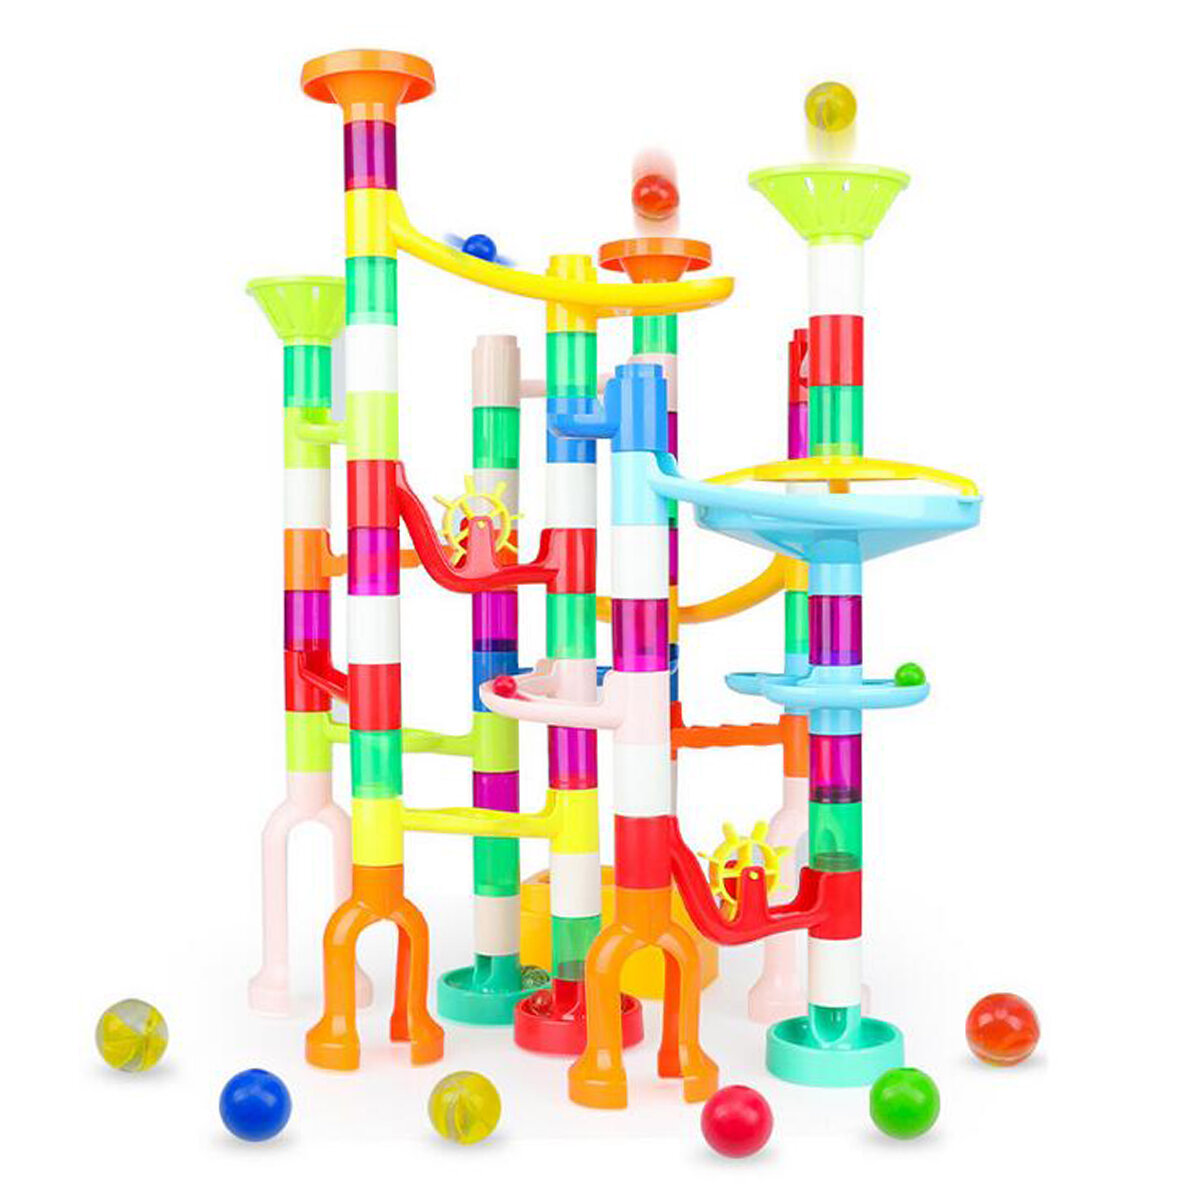 105 Pcs Colorful Transparent Plastic Creative Marble Run Coasters DIY Assembly Track Blocks Toy for 